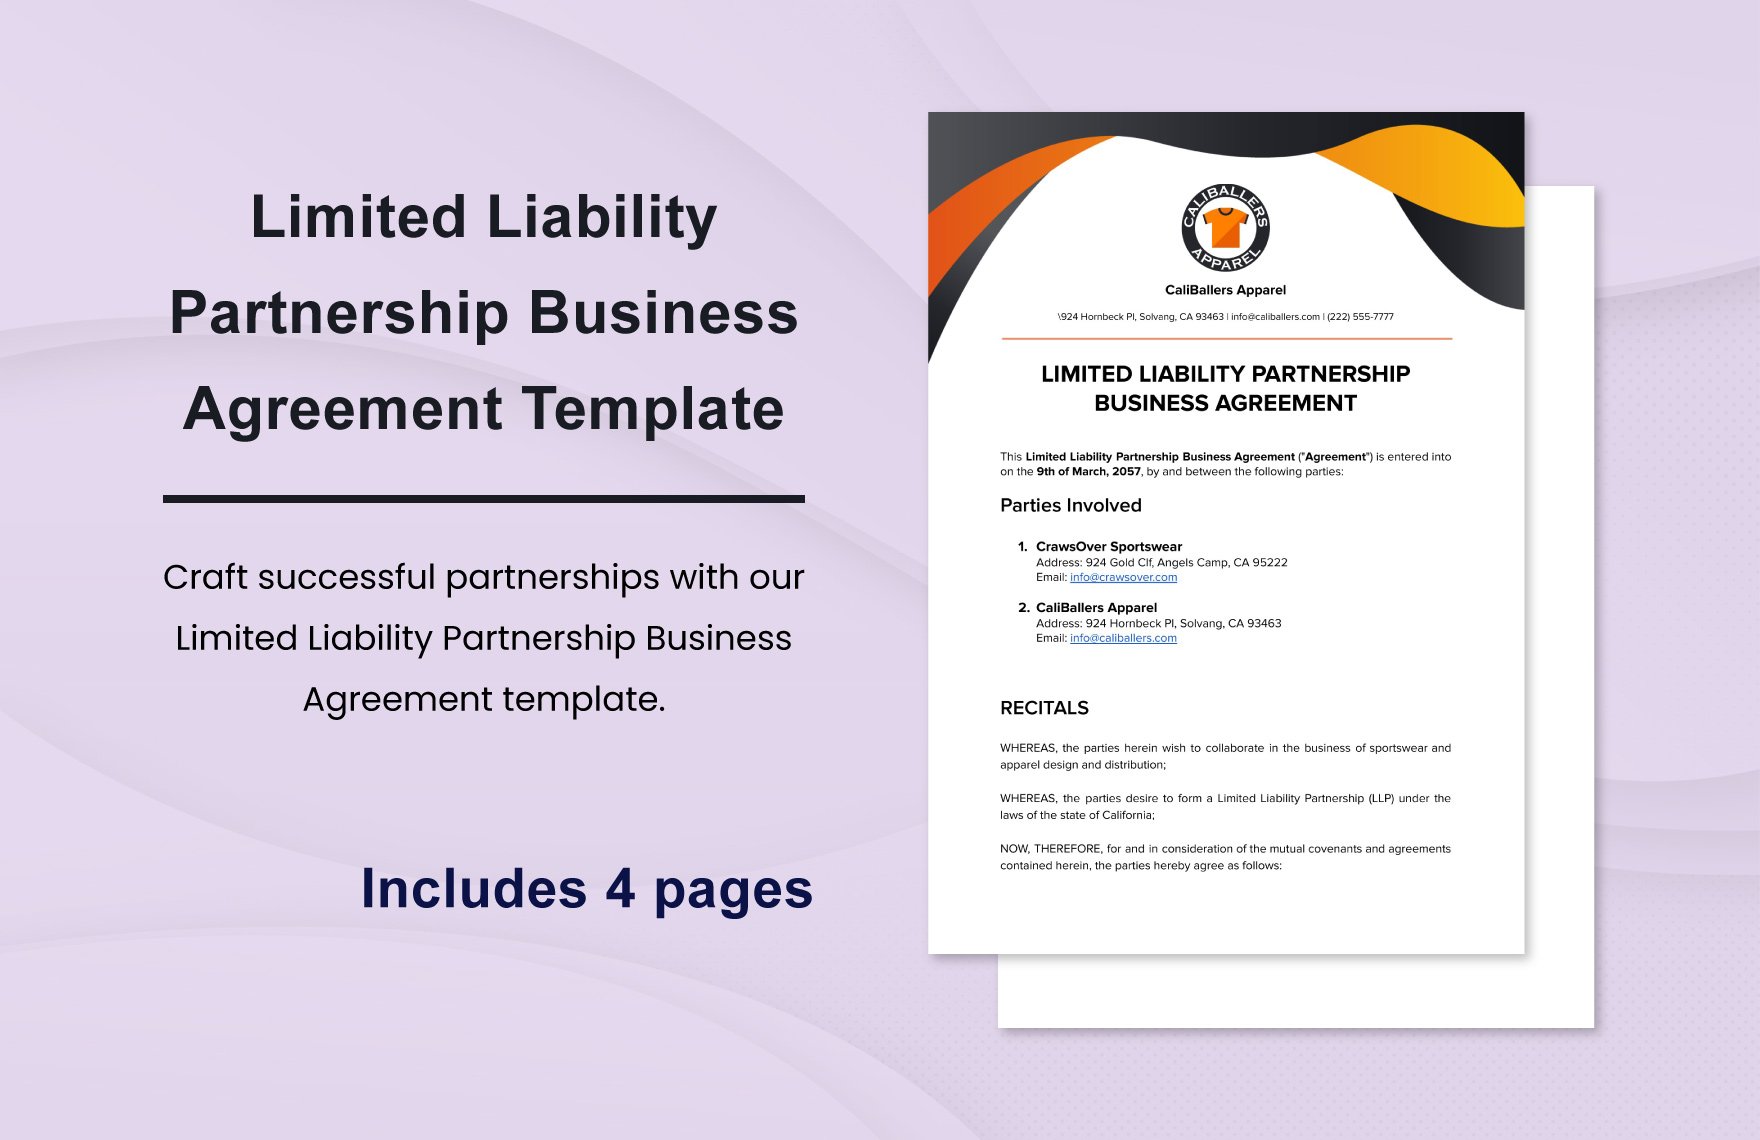 Limited Liability Partnership Business Agreement Template